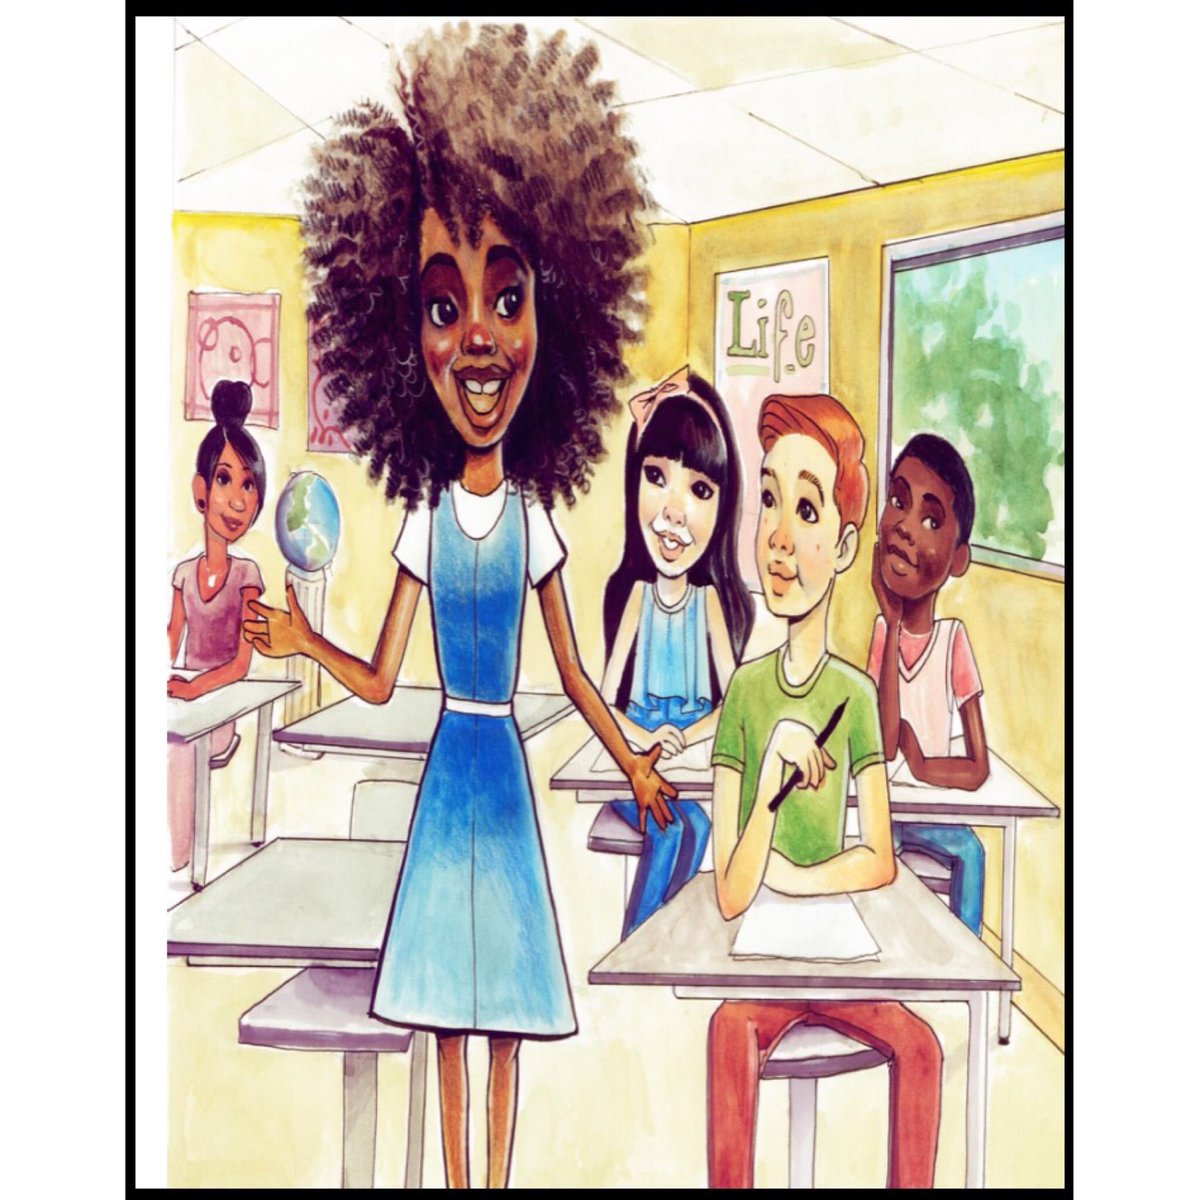 Who experienced 1st day of school jitters?😬 #Chipo has🙋🏾! Find out how she powered thru in 📚 #MeetChipo • #KidsBooks #Read #ZimBabeIwe! 👑🇿🇼